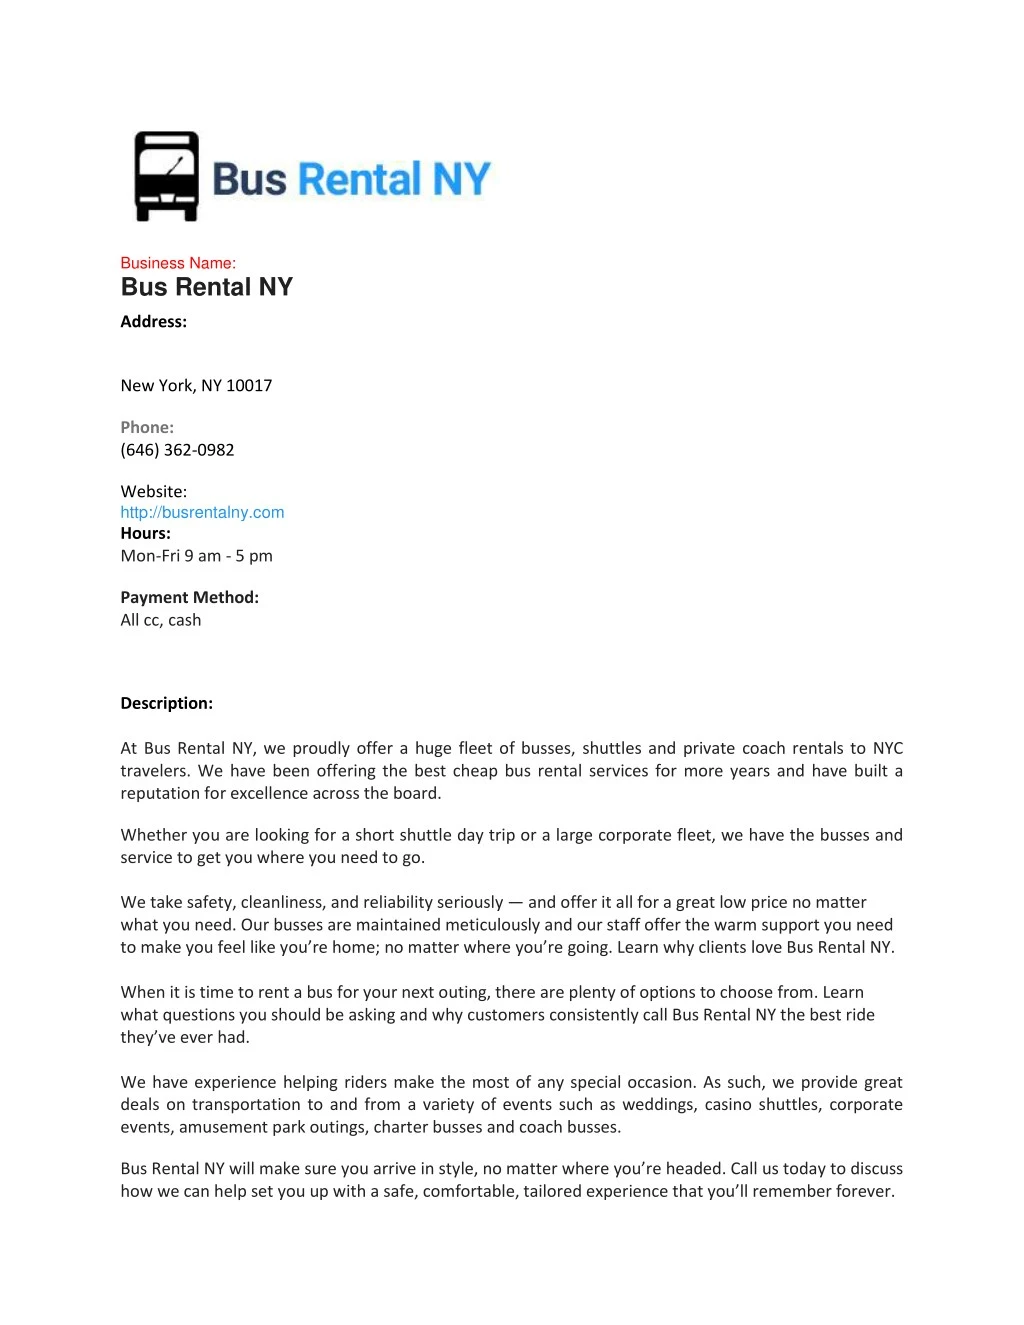 business name bus rental ny